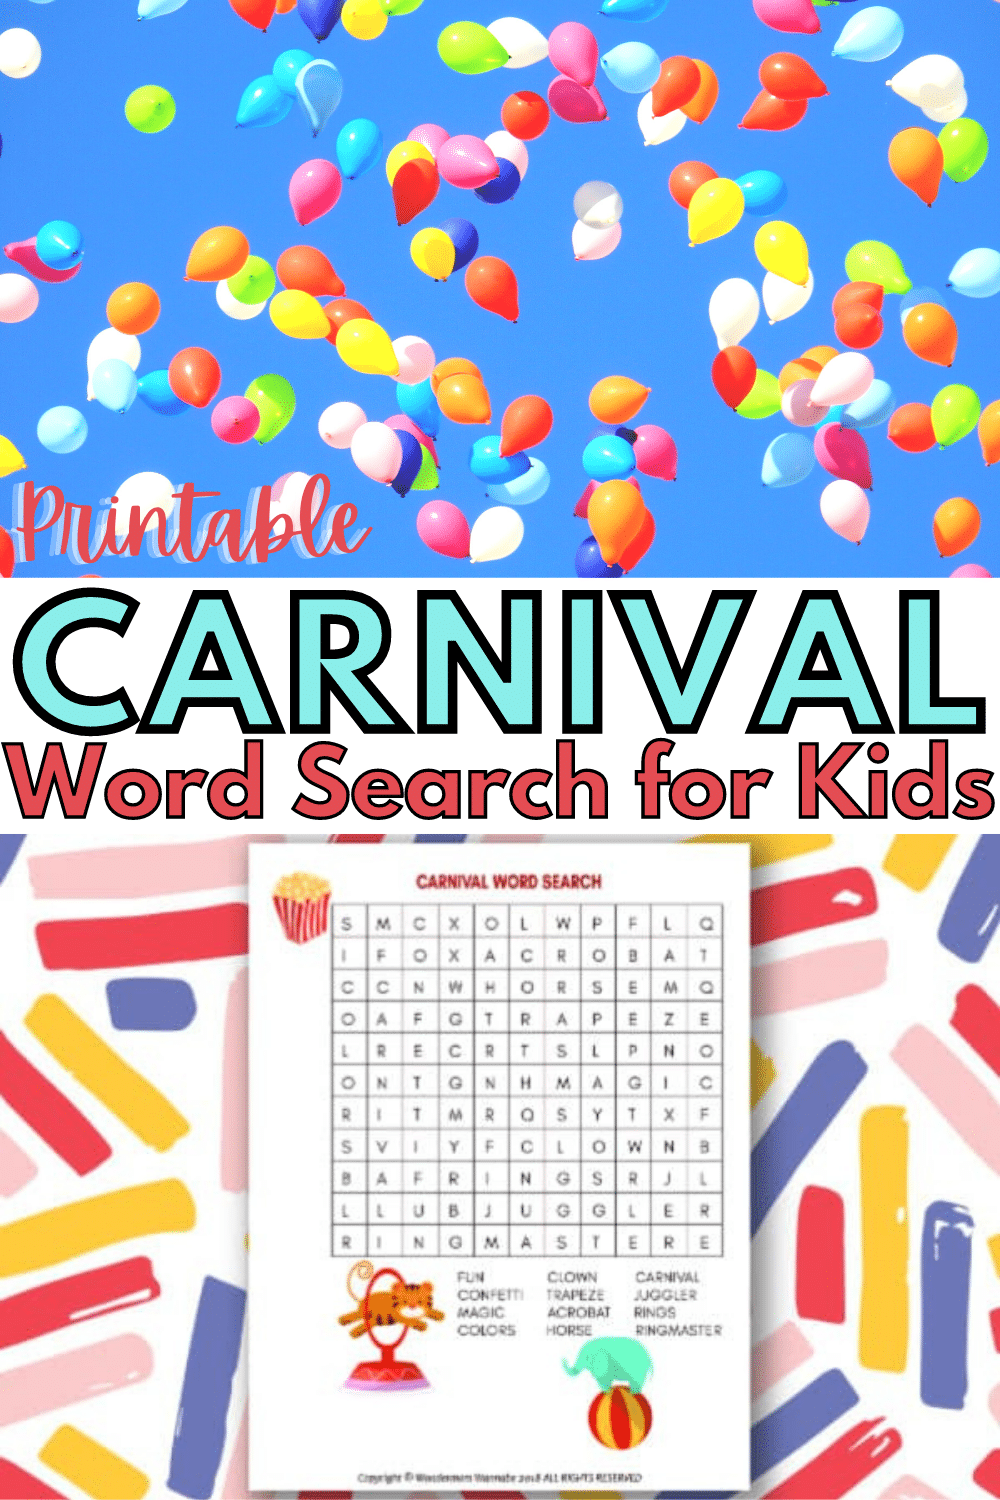 A fun carnival word search for kids is the perfect printable kids activity for any carnival themed party, celebration or event you may be throwing. #carnival #wordsearch #printables via @wondermomwannab